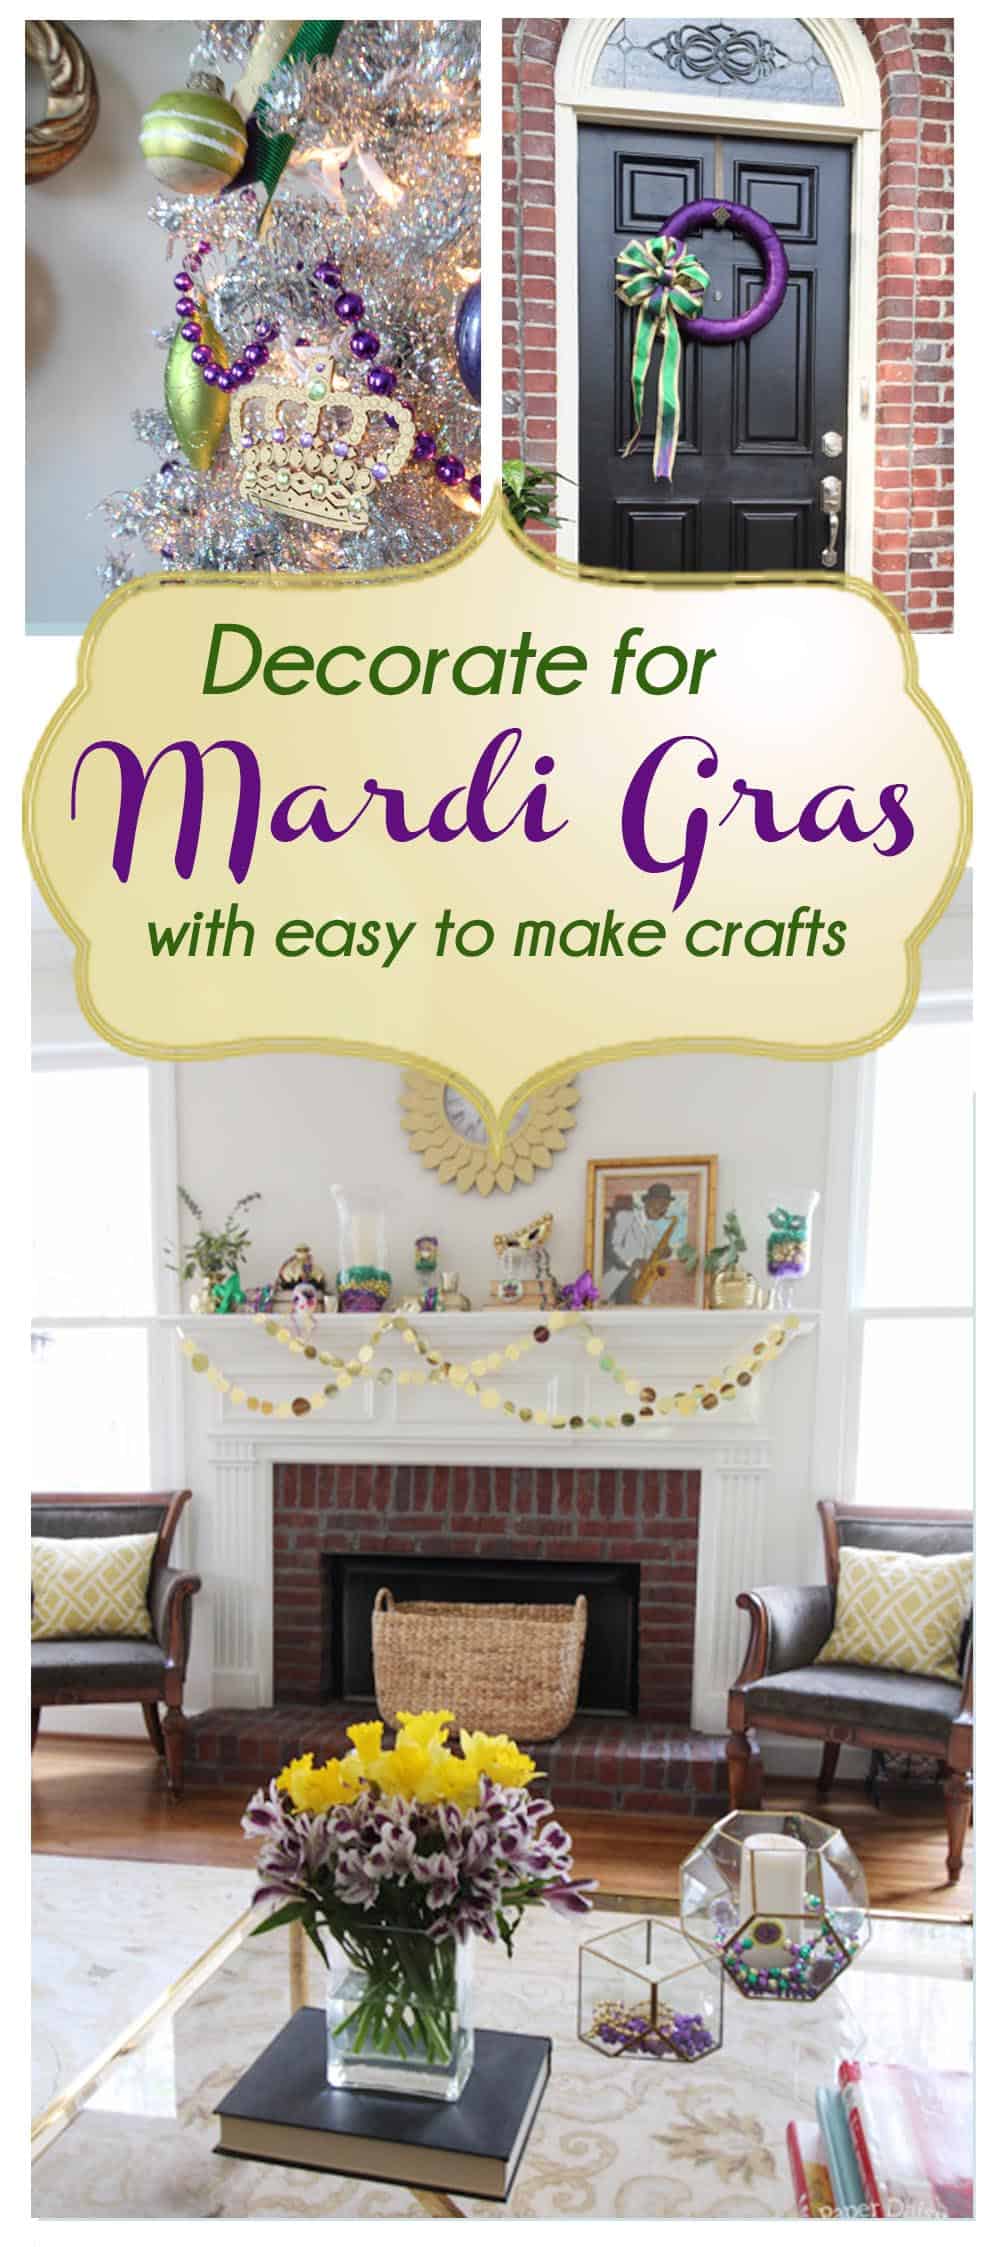 Decorating your house for Mardi Gras